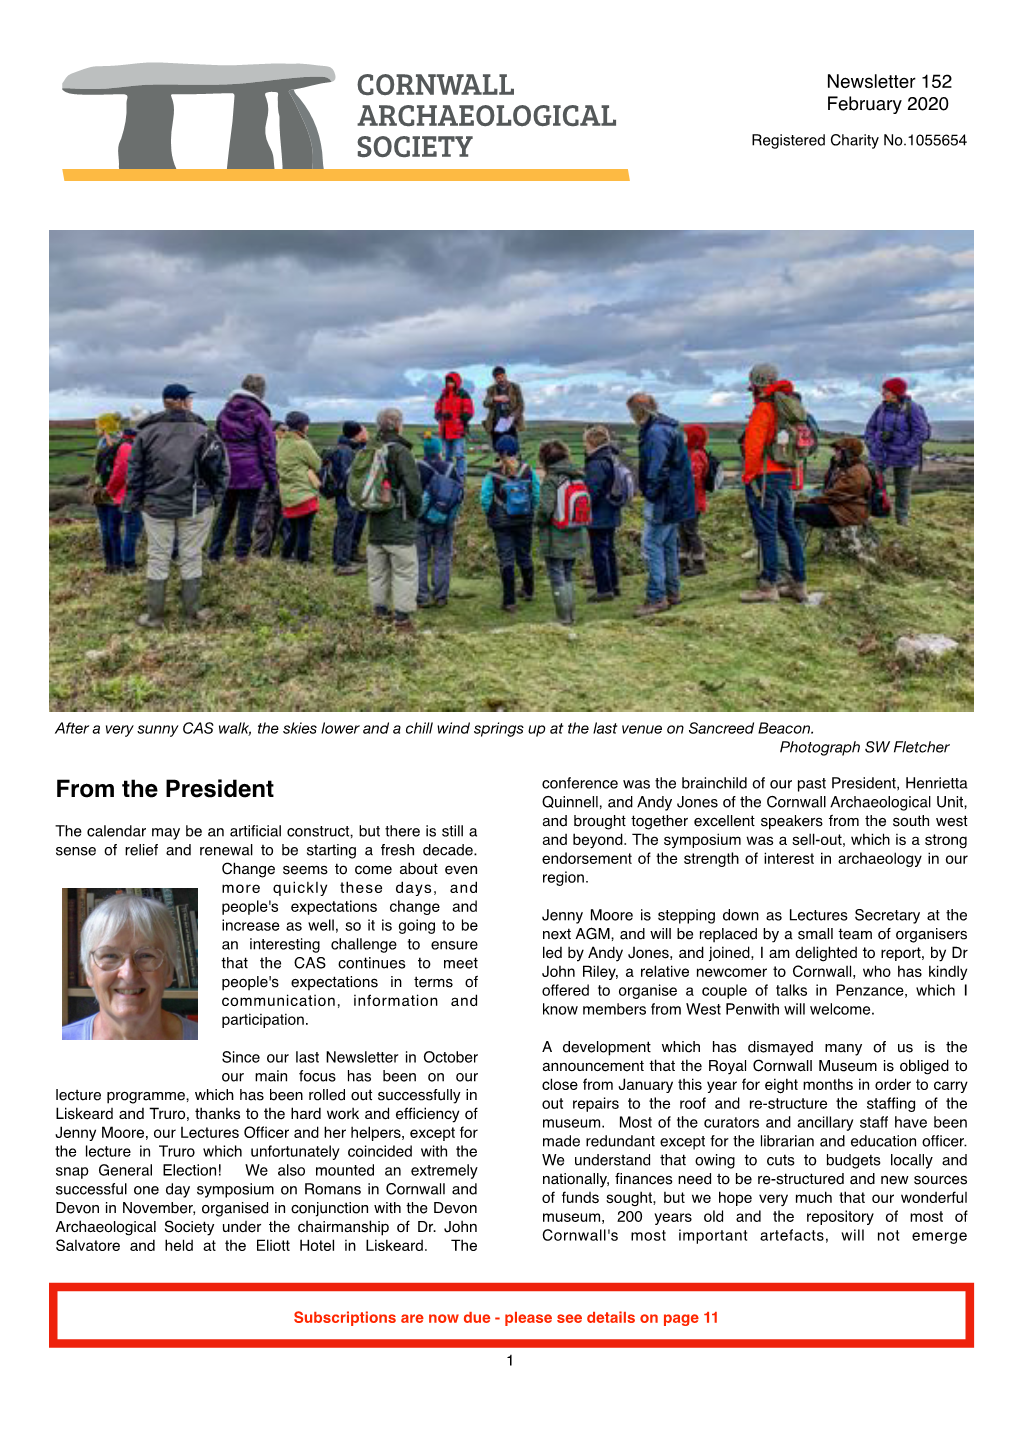 Cornwall Archaeological Society Newsletter 152 Feb 2020